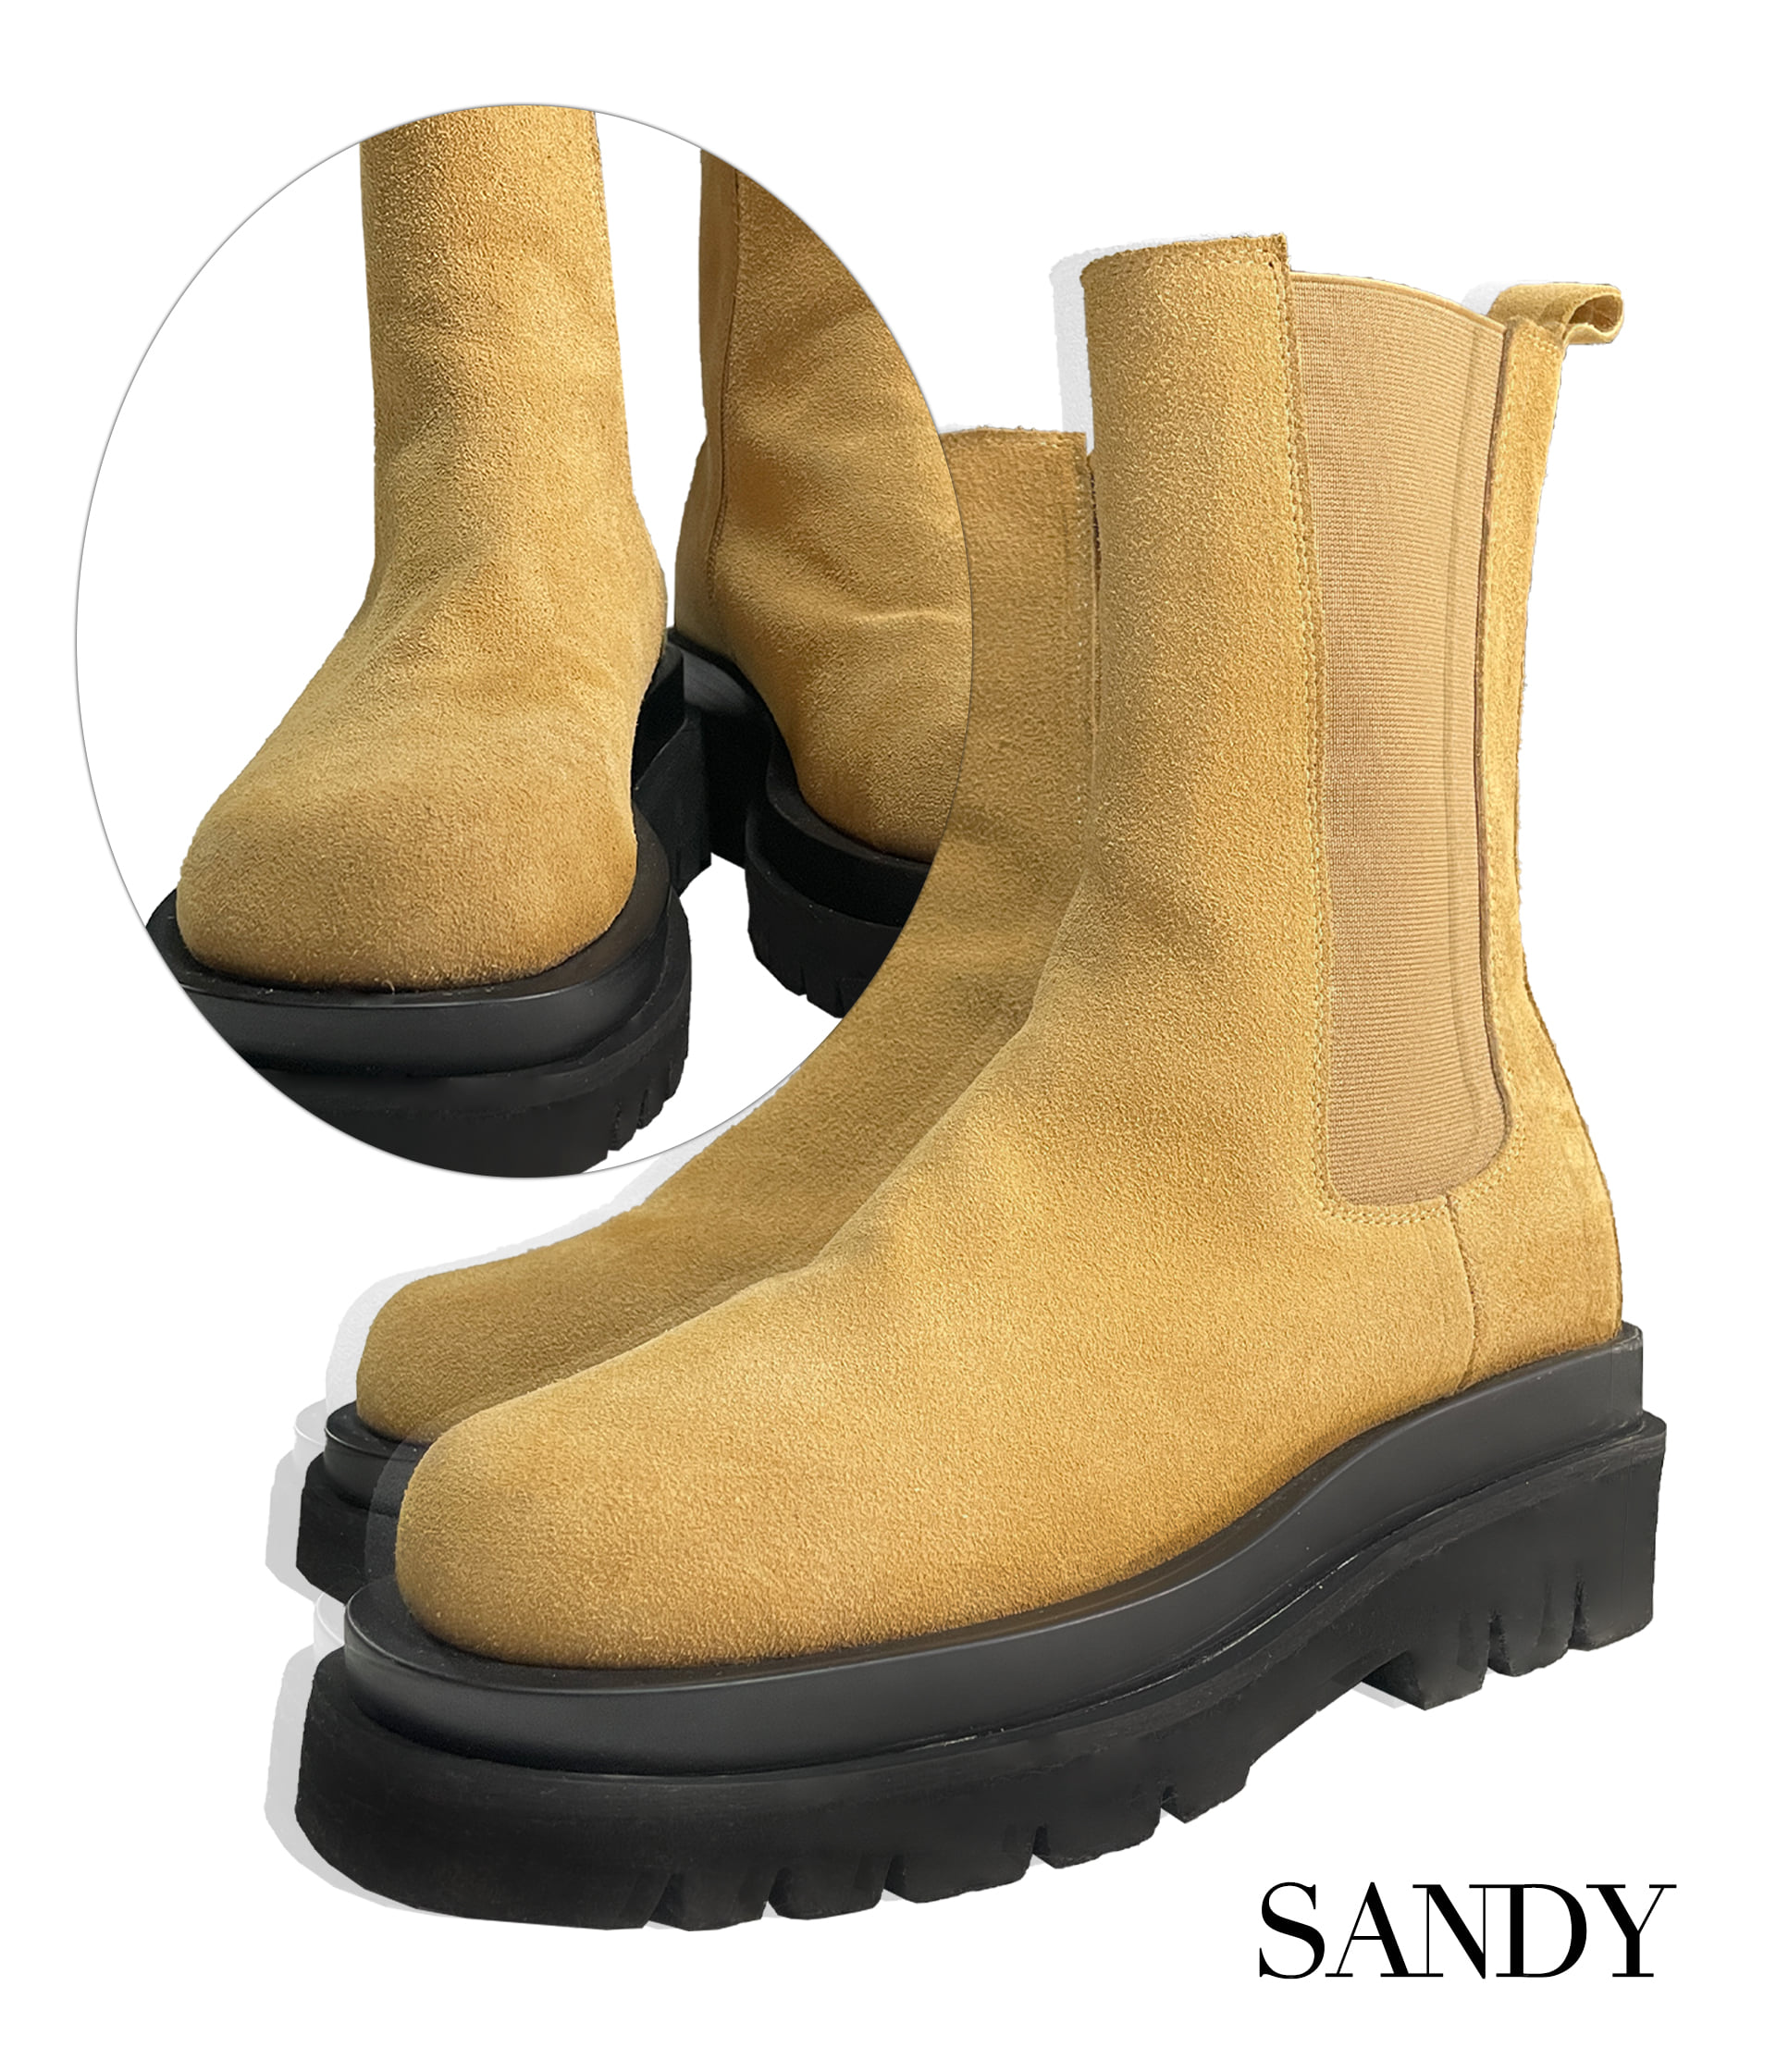 SANDY LEATHER BOOTS